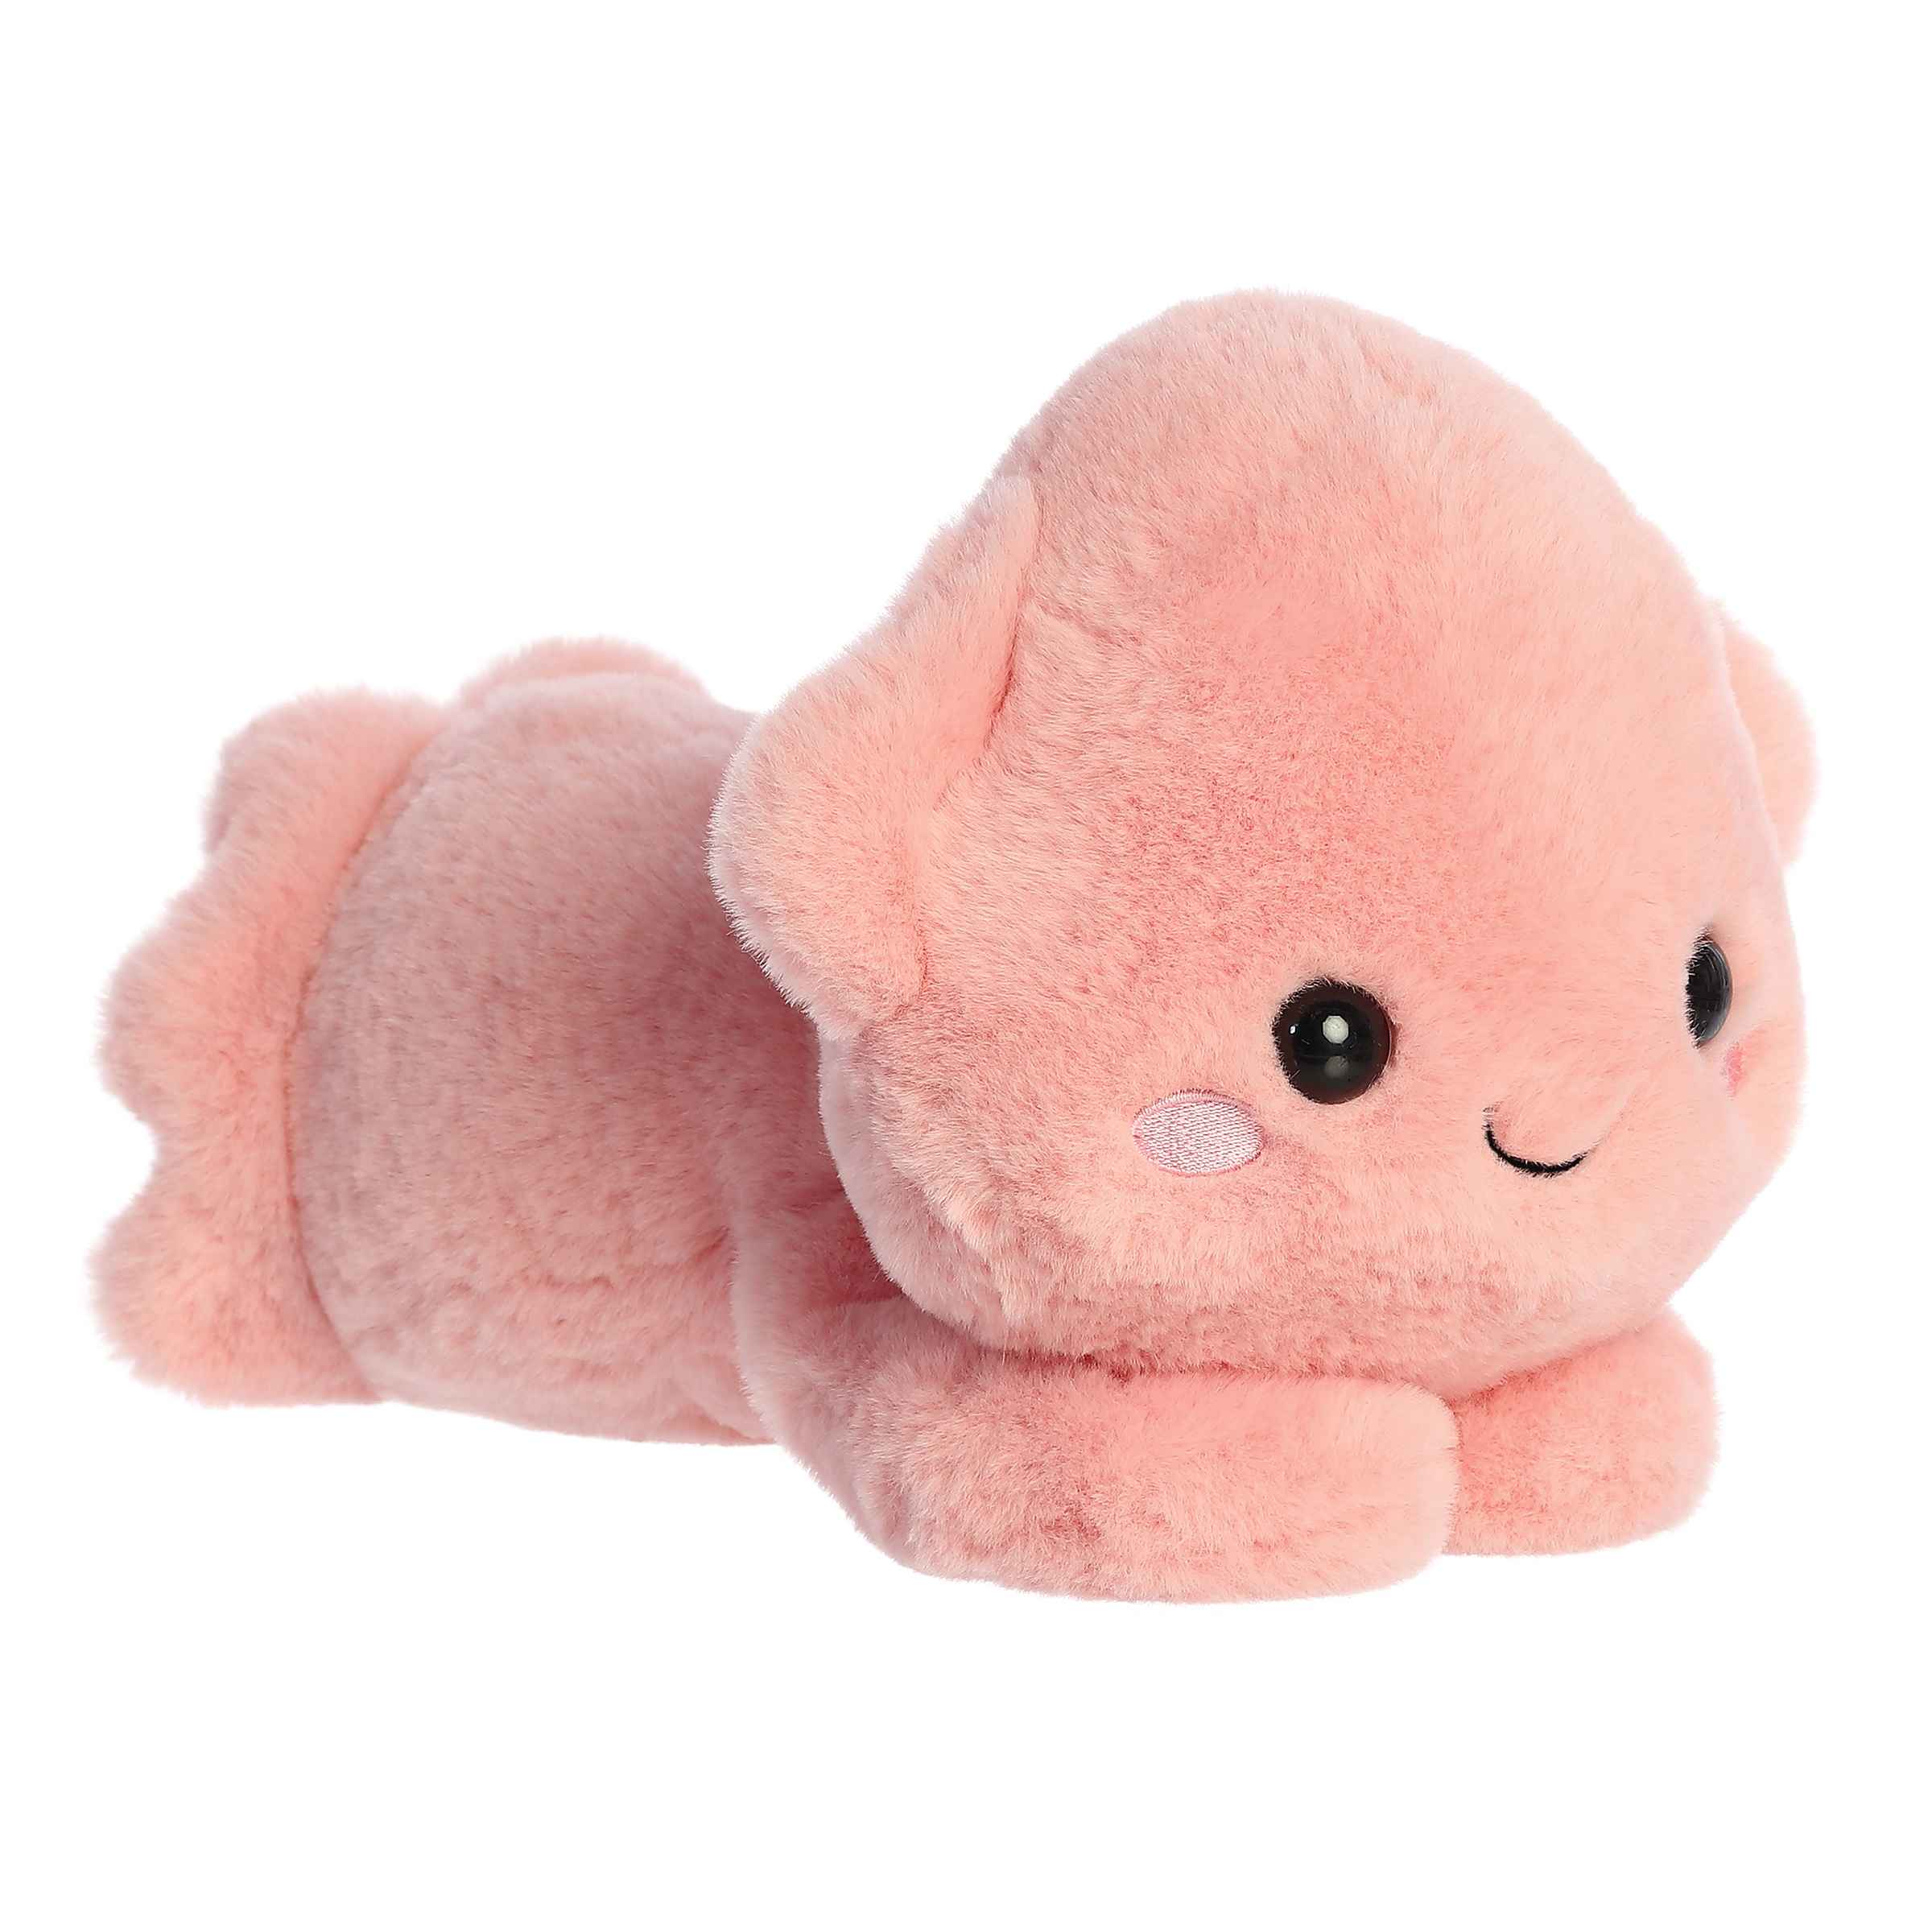 Skyler Squid plush from Too Cute Collection, pastel pink, big shiny eyes, super cuddly